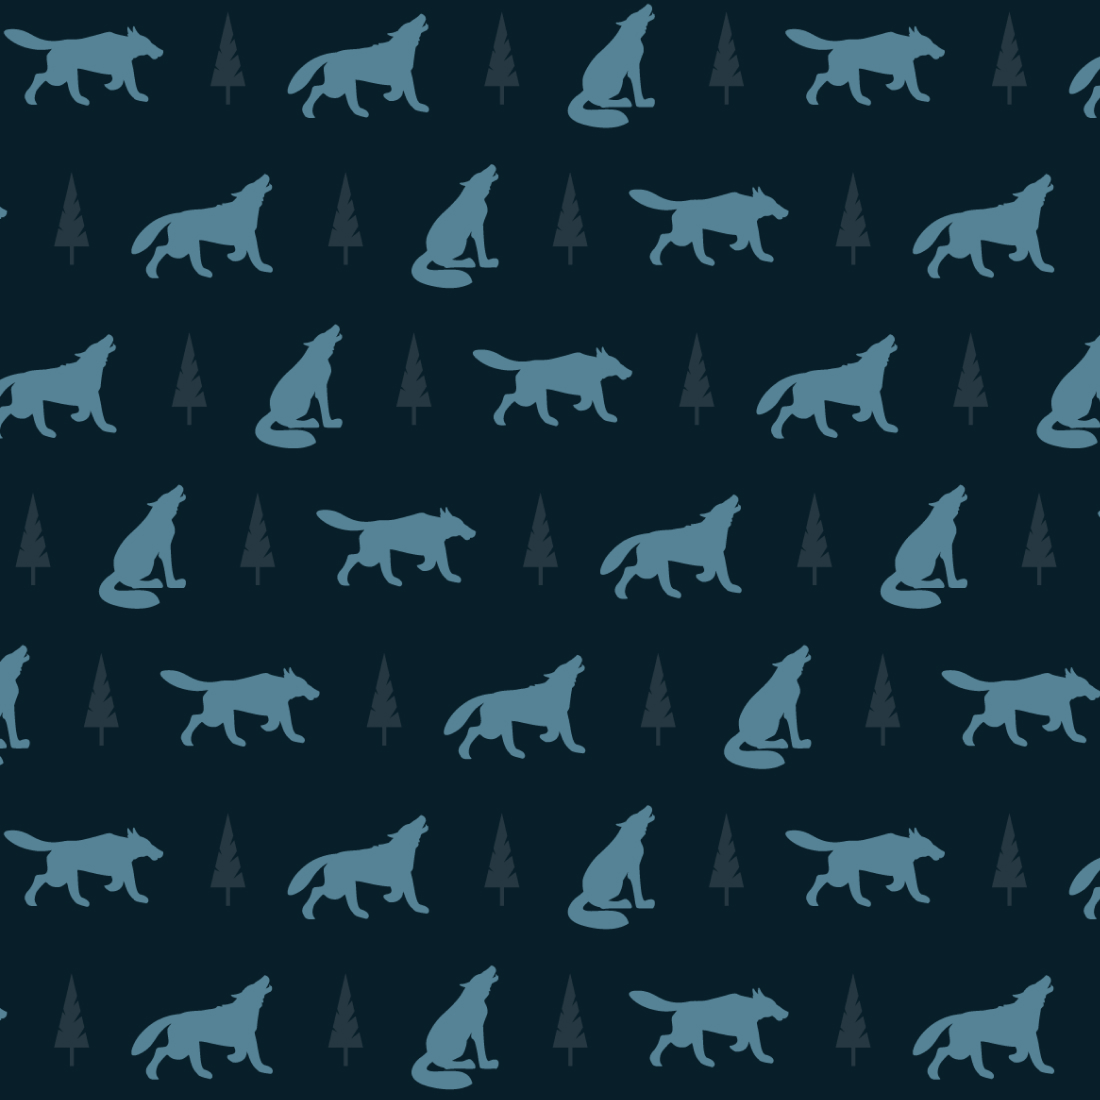 Pattern of dogs and trees on a black background.